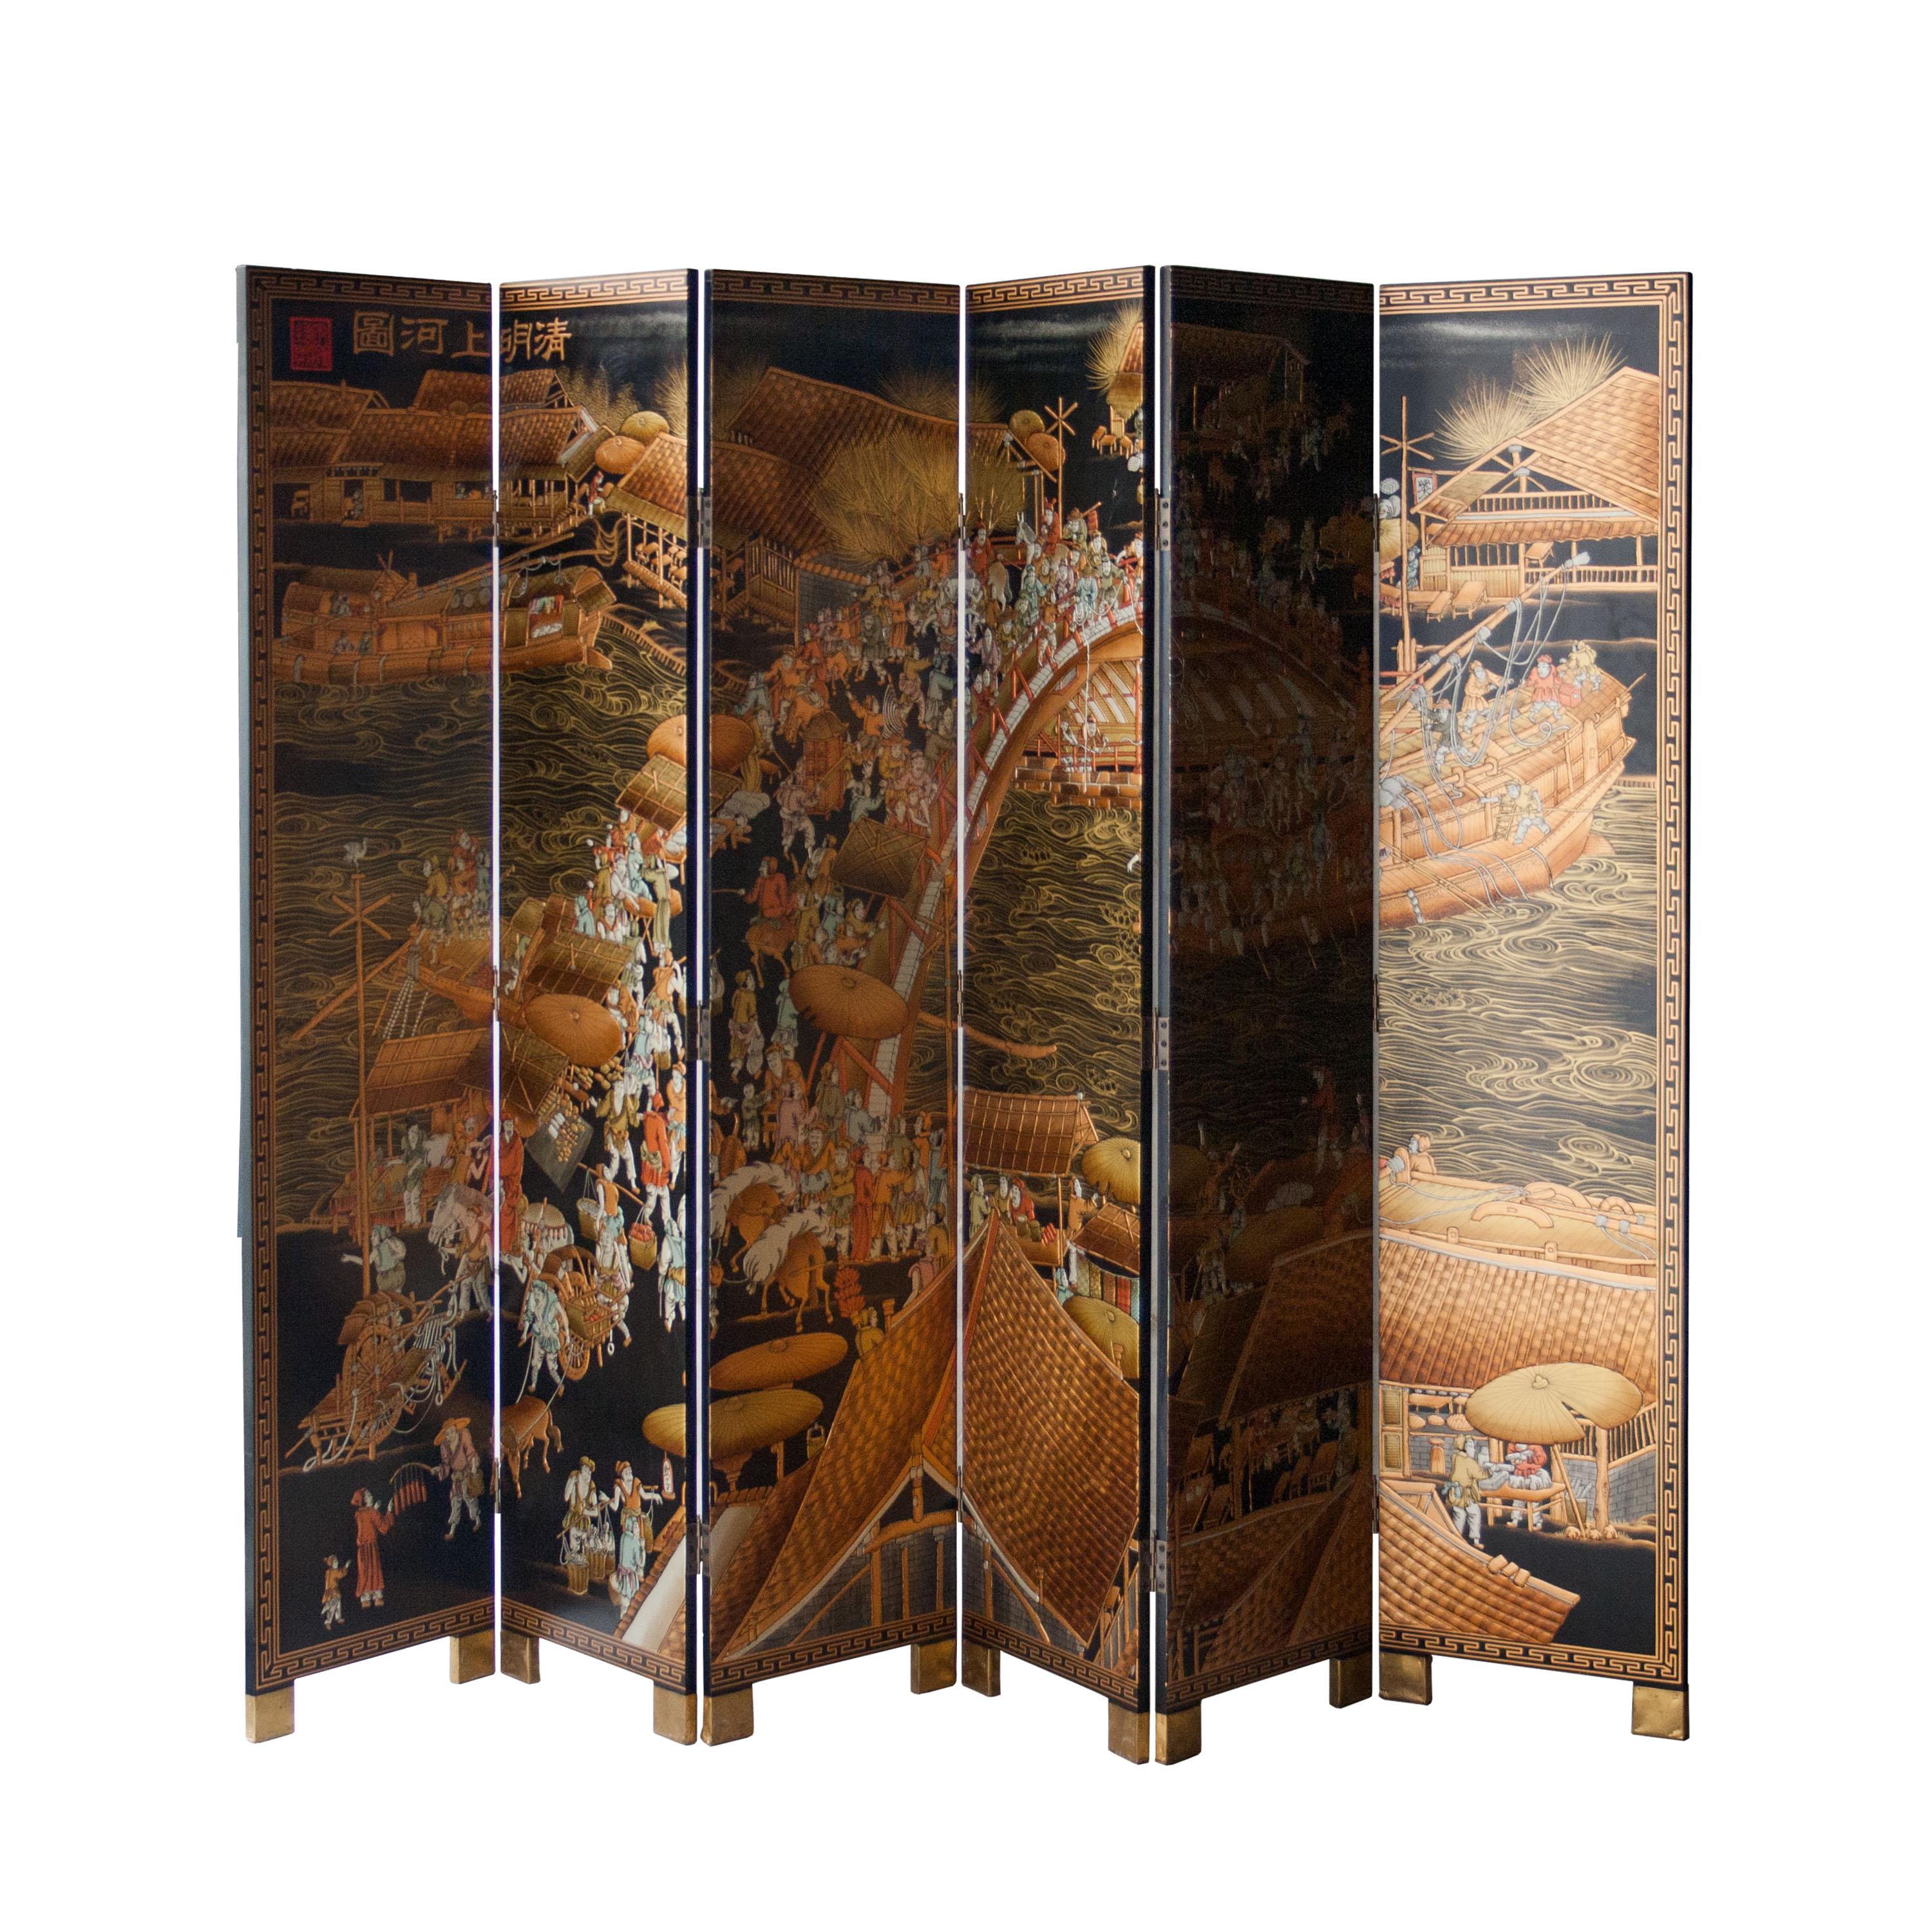 Screen made of wood with 6 articulated panels. Black exquisite coromandel lacquer with traditional Phillippine scenes. Brass finished legs. Black laquered back decorated with Asian characters. Perfect condition.